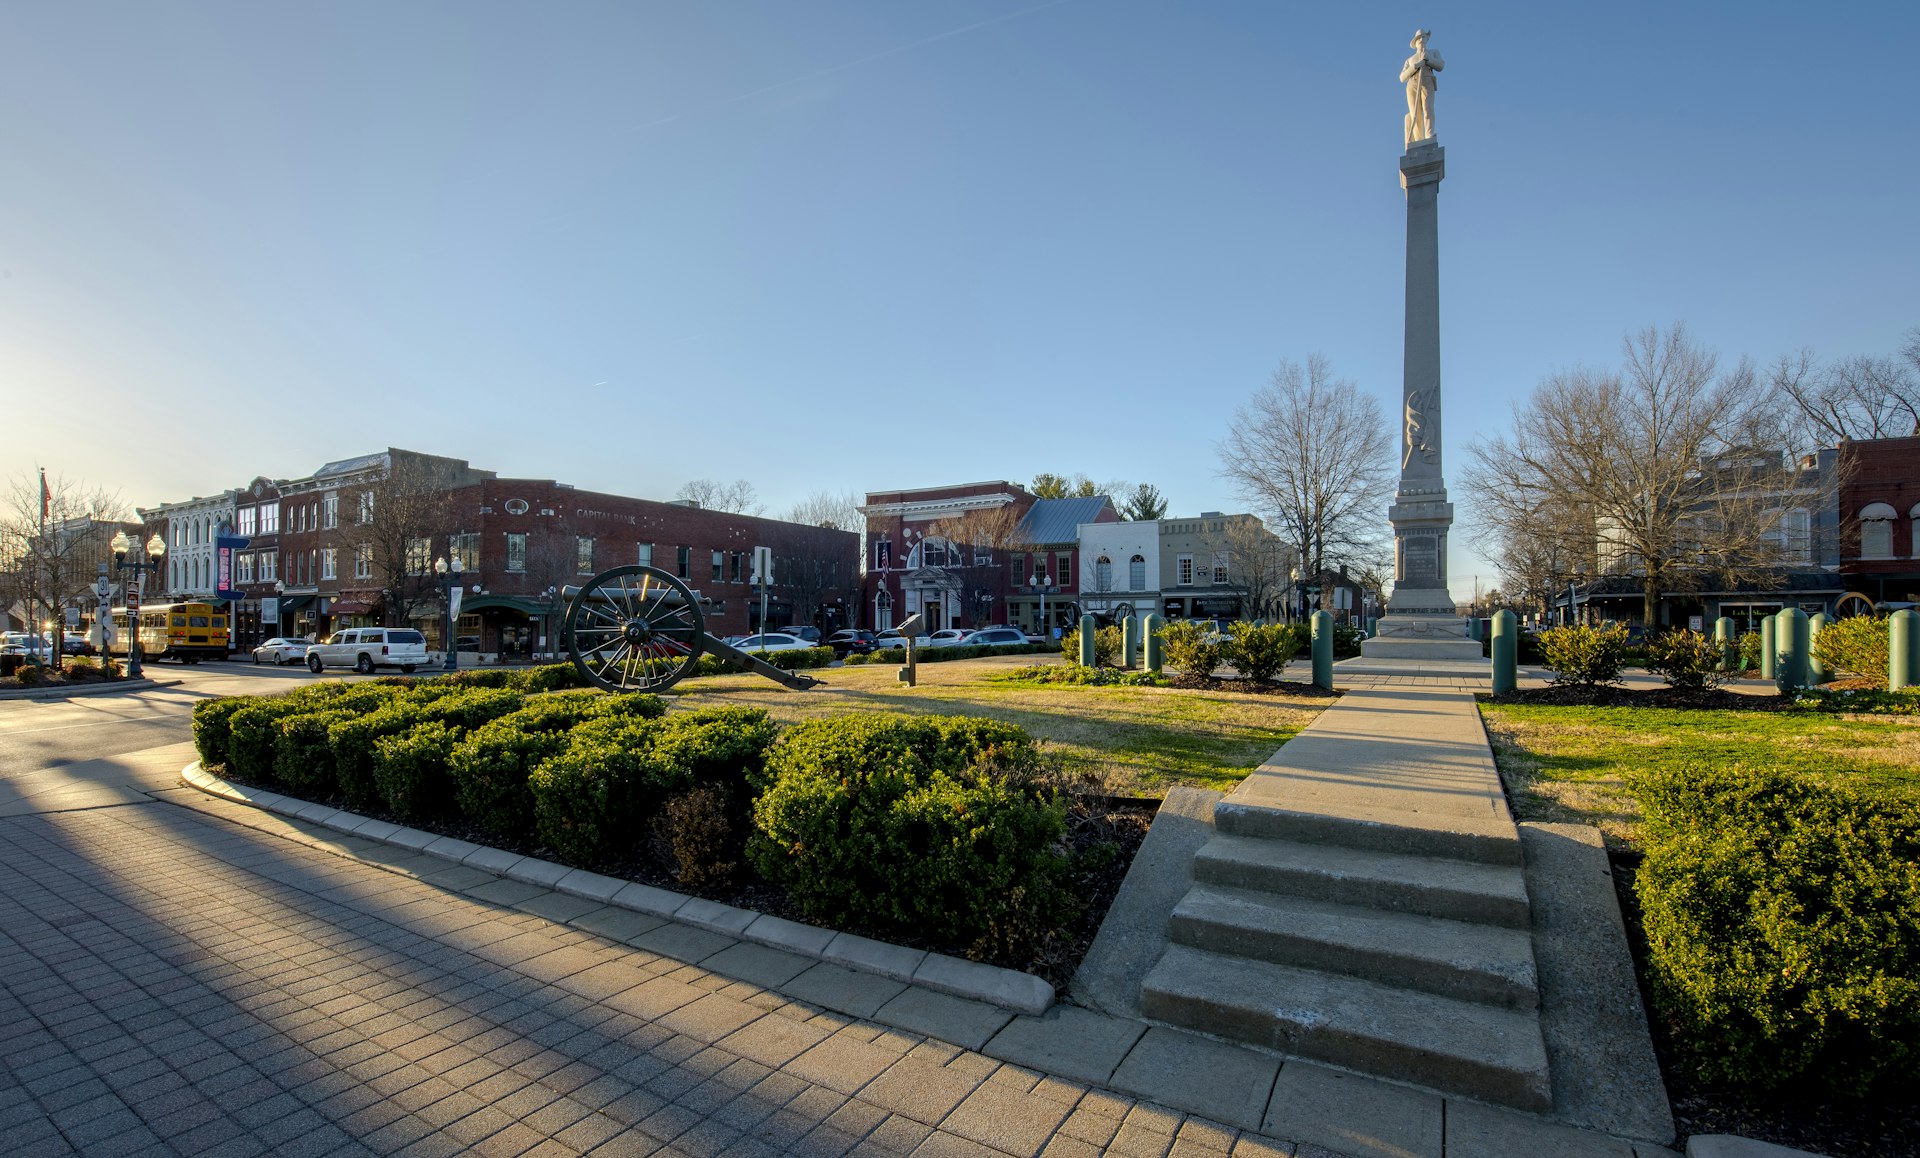 Franklin Square, one of several important historic sites in Tennessee 